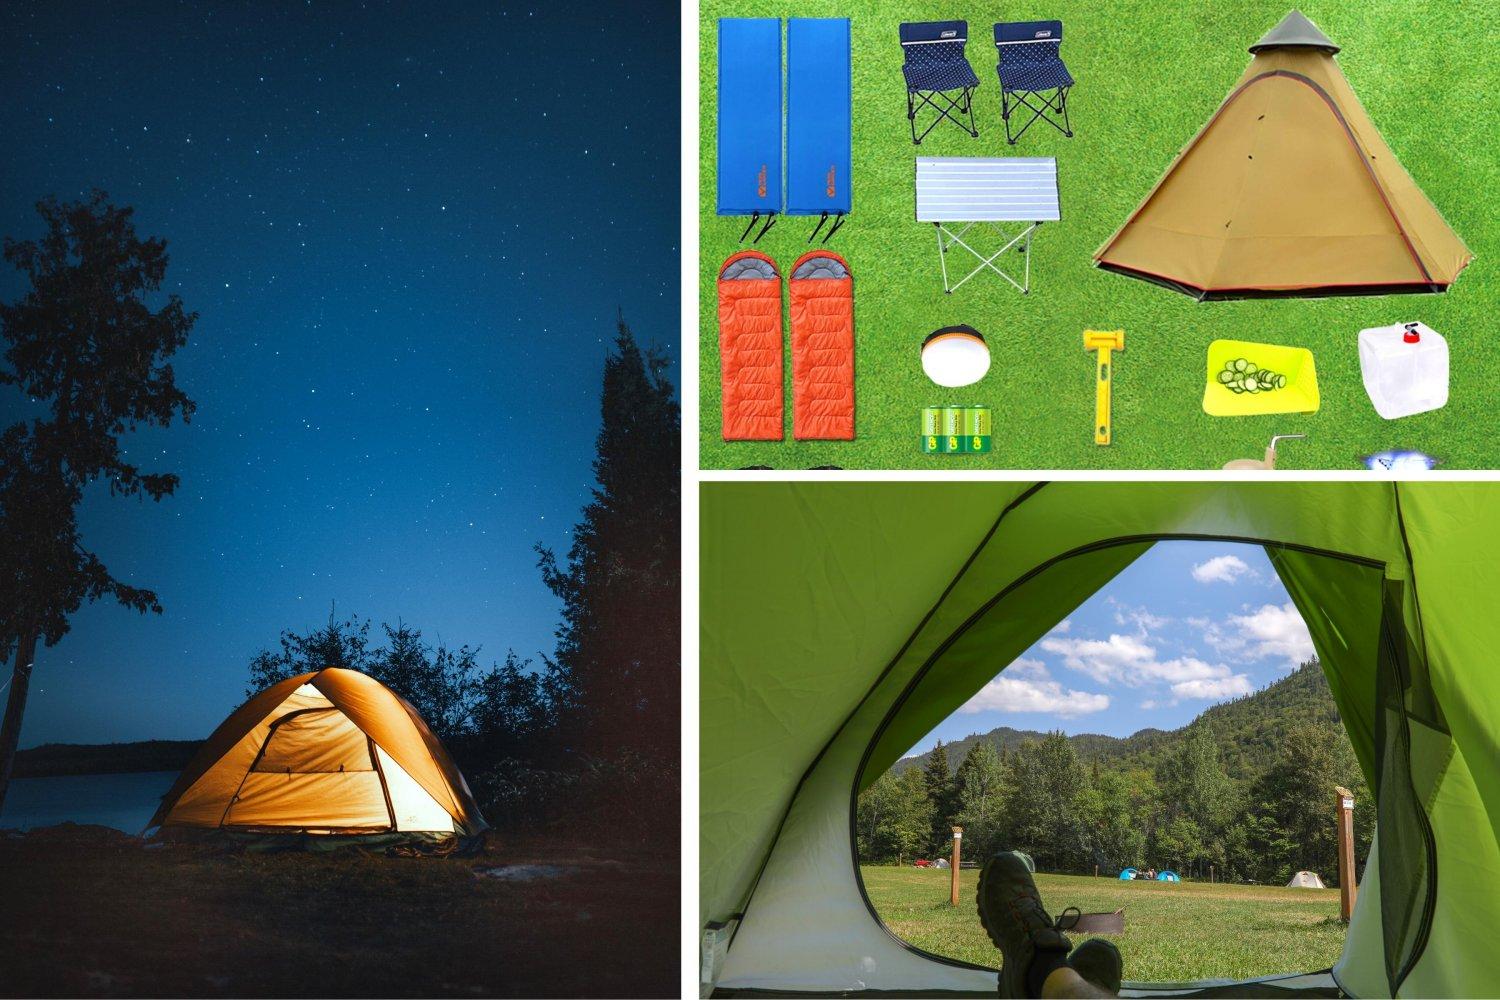 GOGO CAMP COMPANY 【Direct delivery to designated campsites】Camping Gear Rental Set for 2-4 pax 1